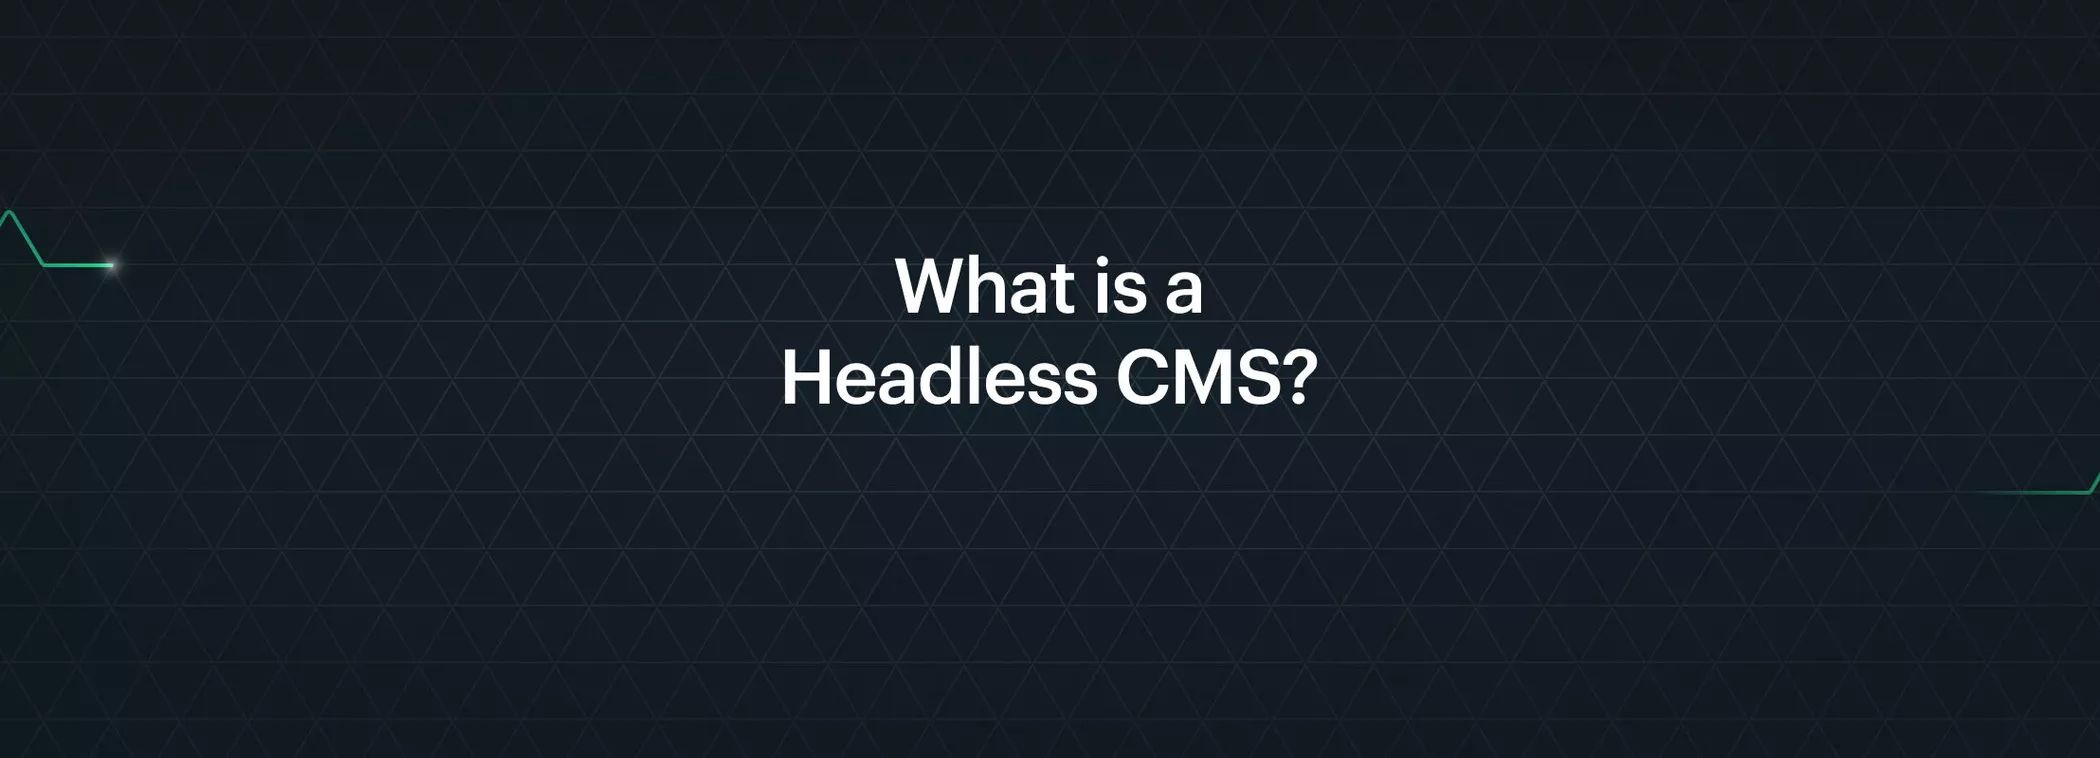 what is a headless cms